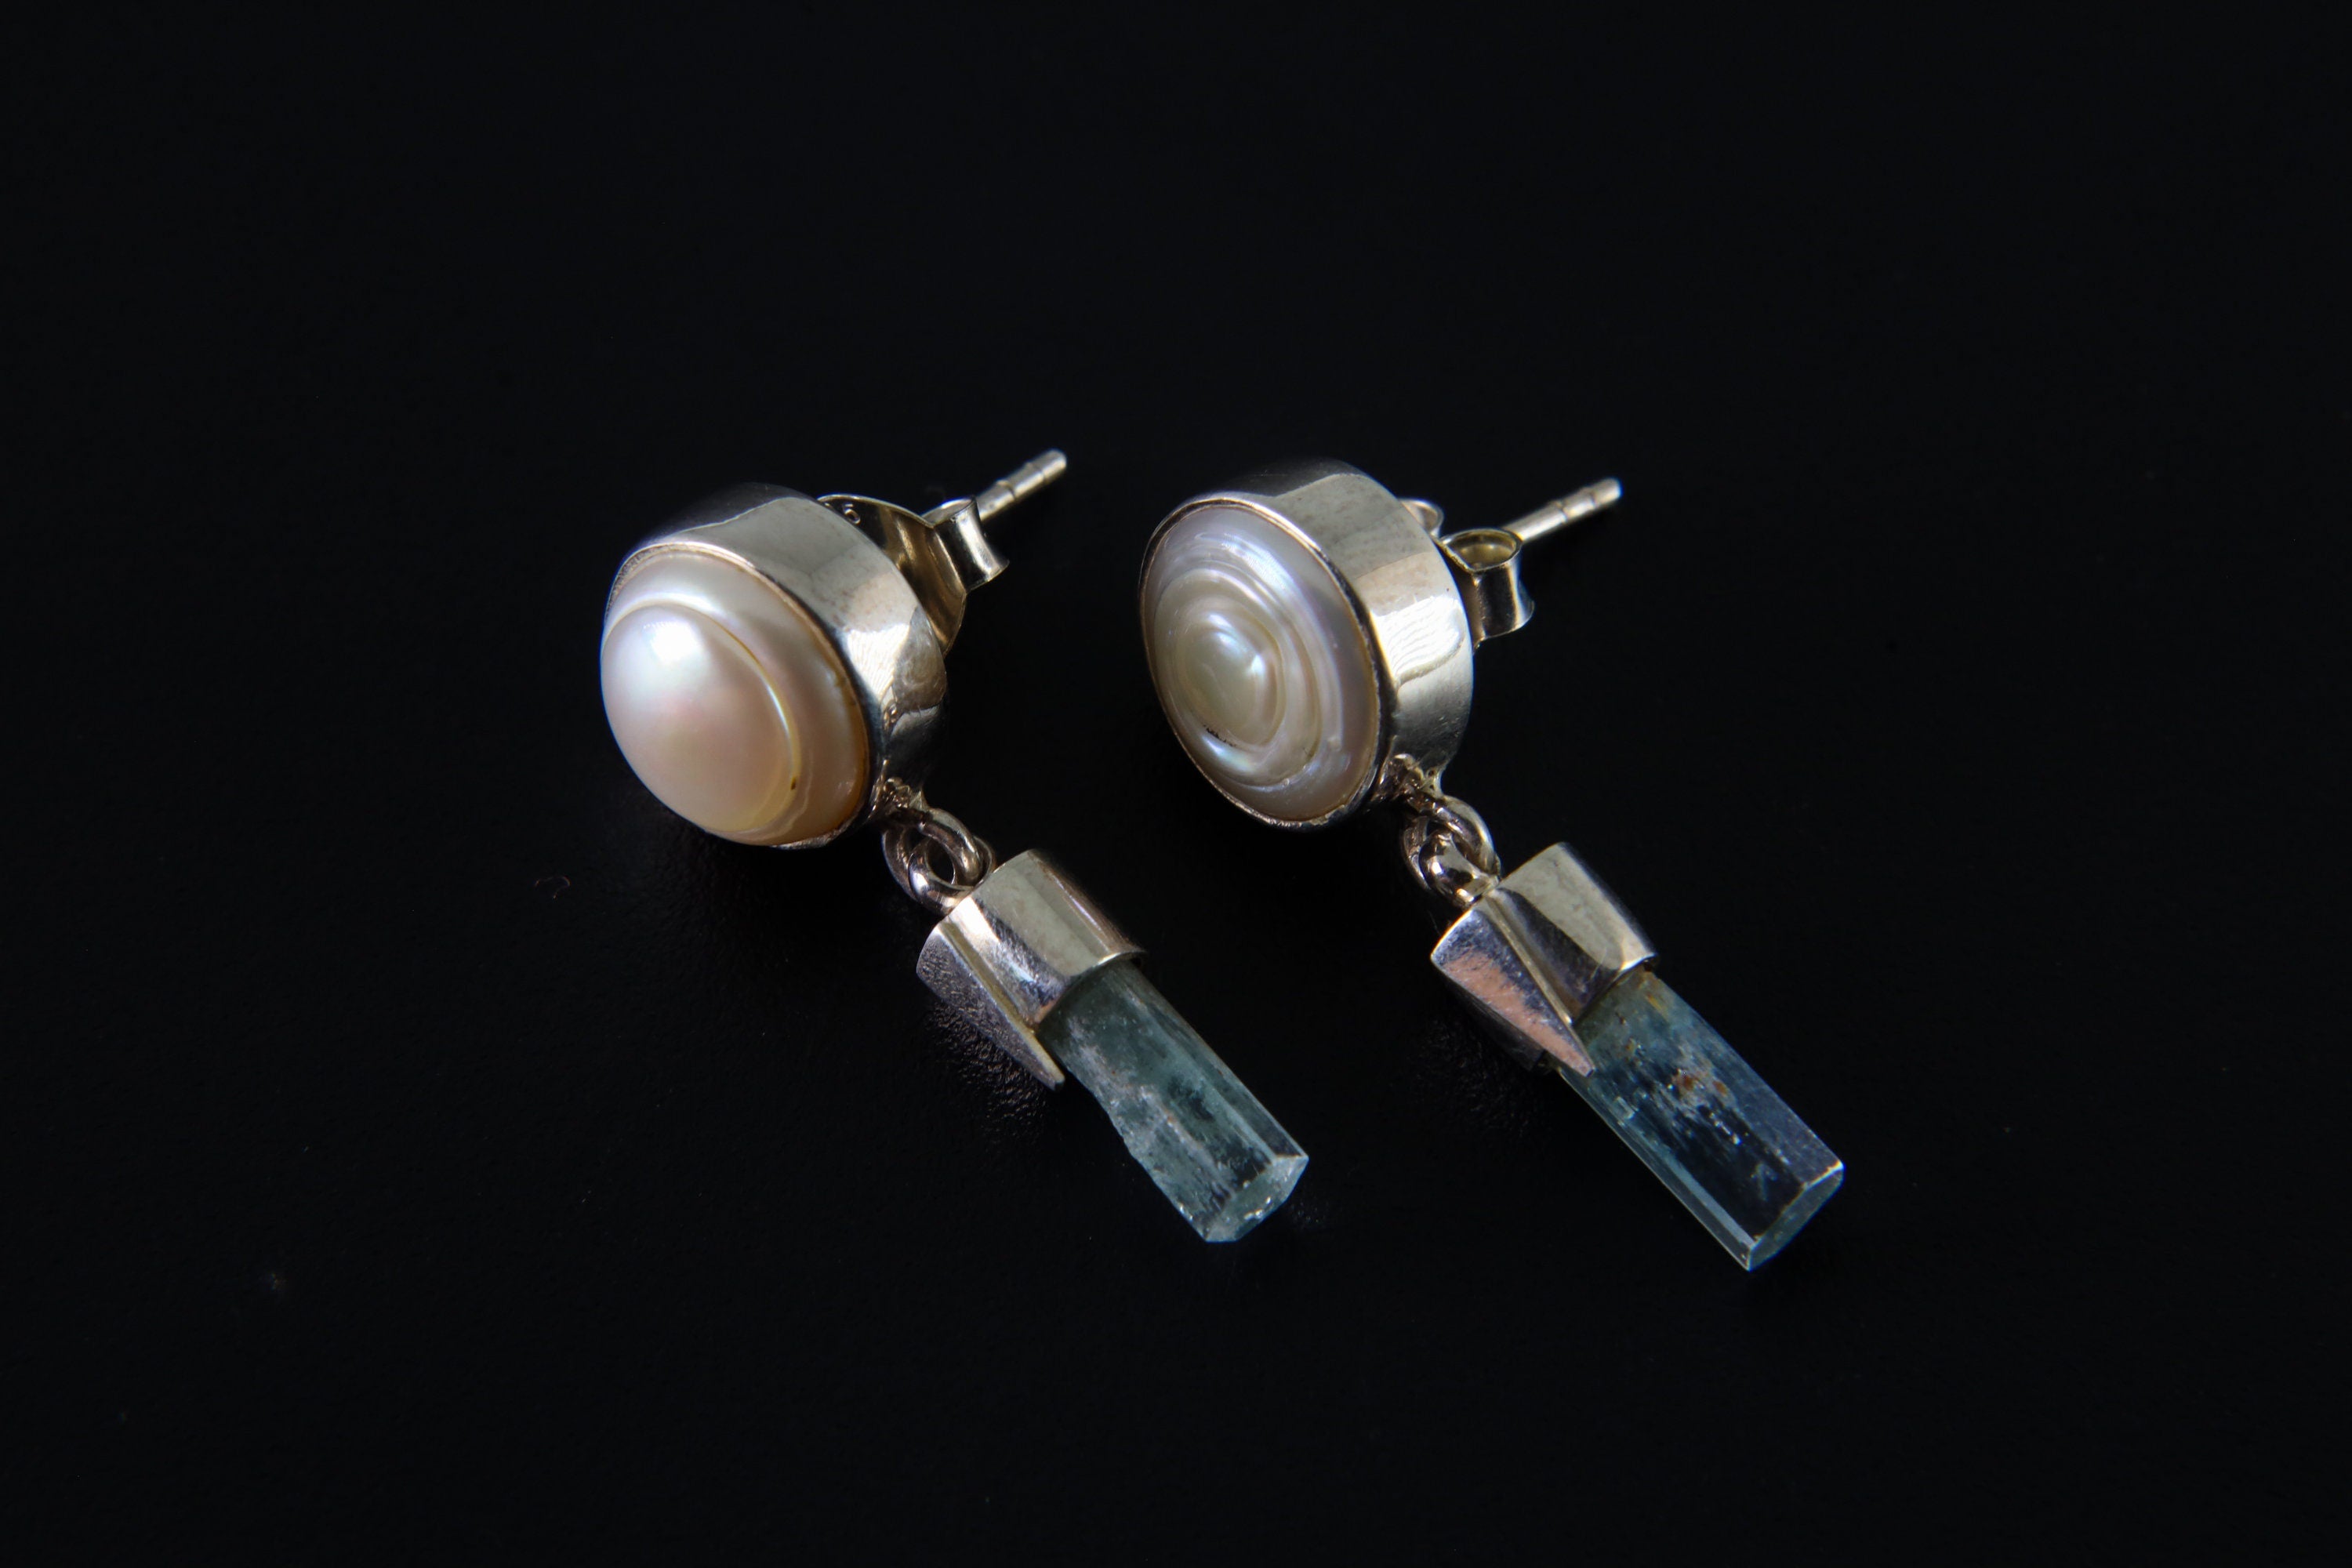 Pair of South Sea Pearls & Raw Natural Aquamarine Studs - Polished Sterling Silver - Dangle Stud Earring